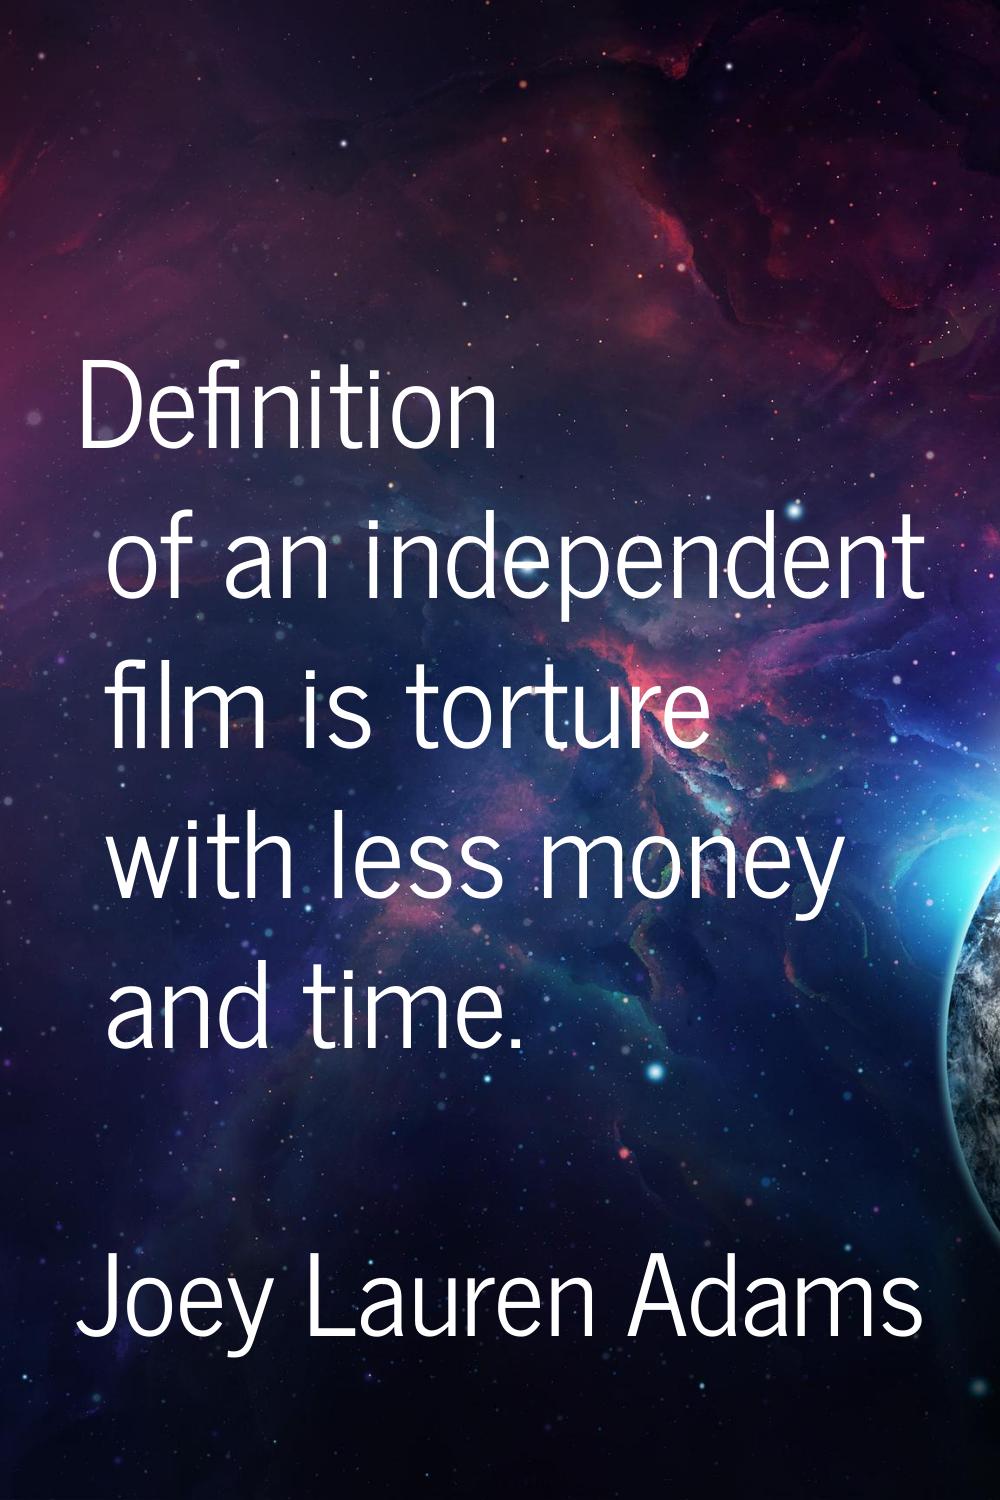 Definition of an independent film is torture with less money and time.